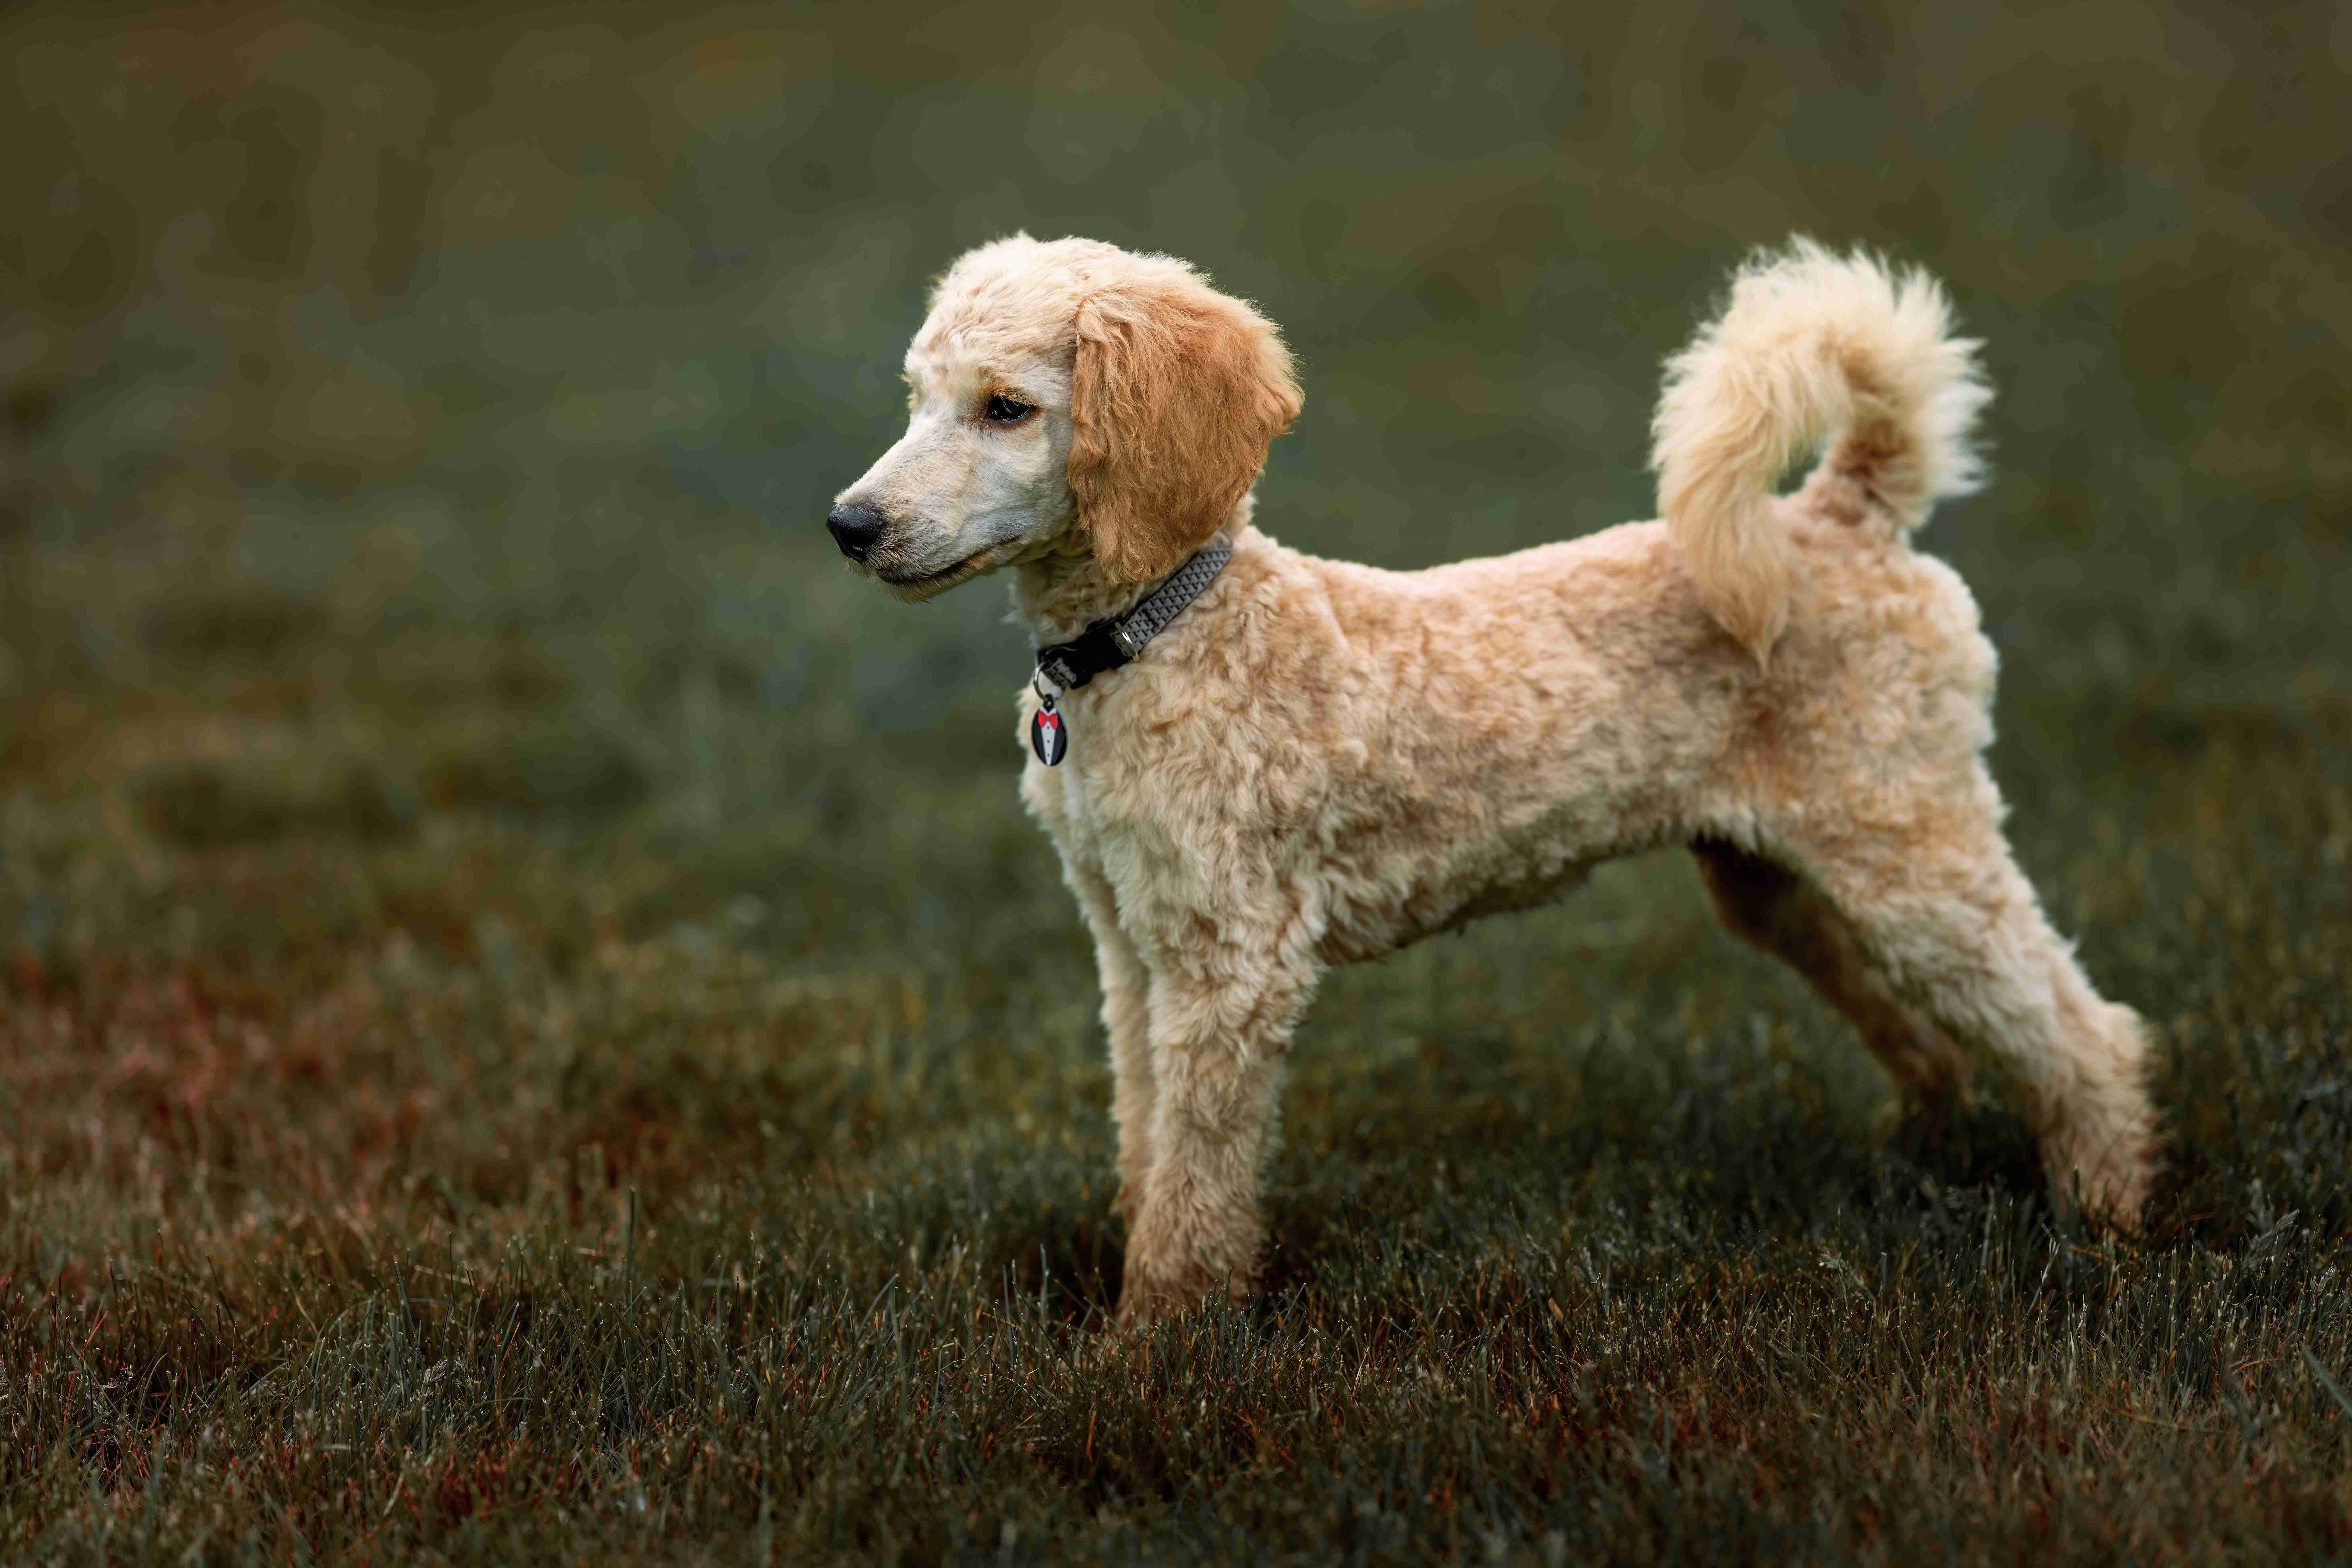 How can owners detect and treat heart conditions in Poodles?